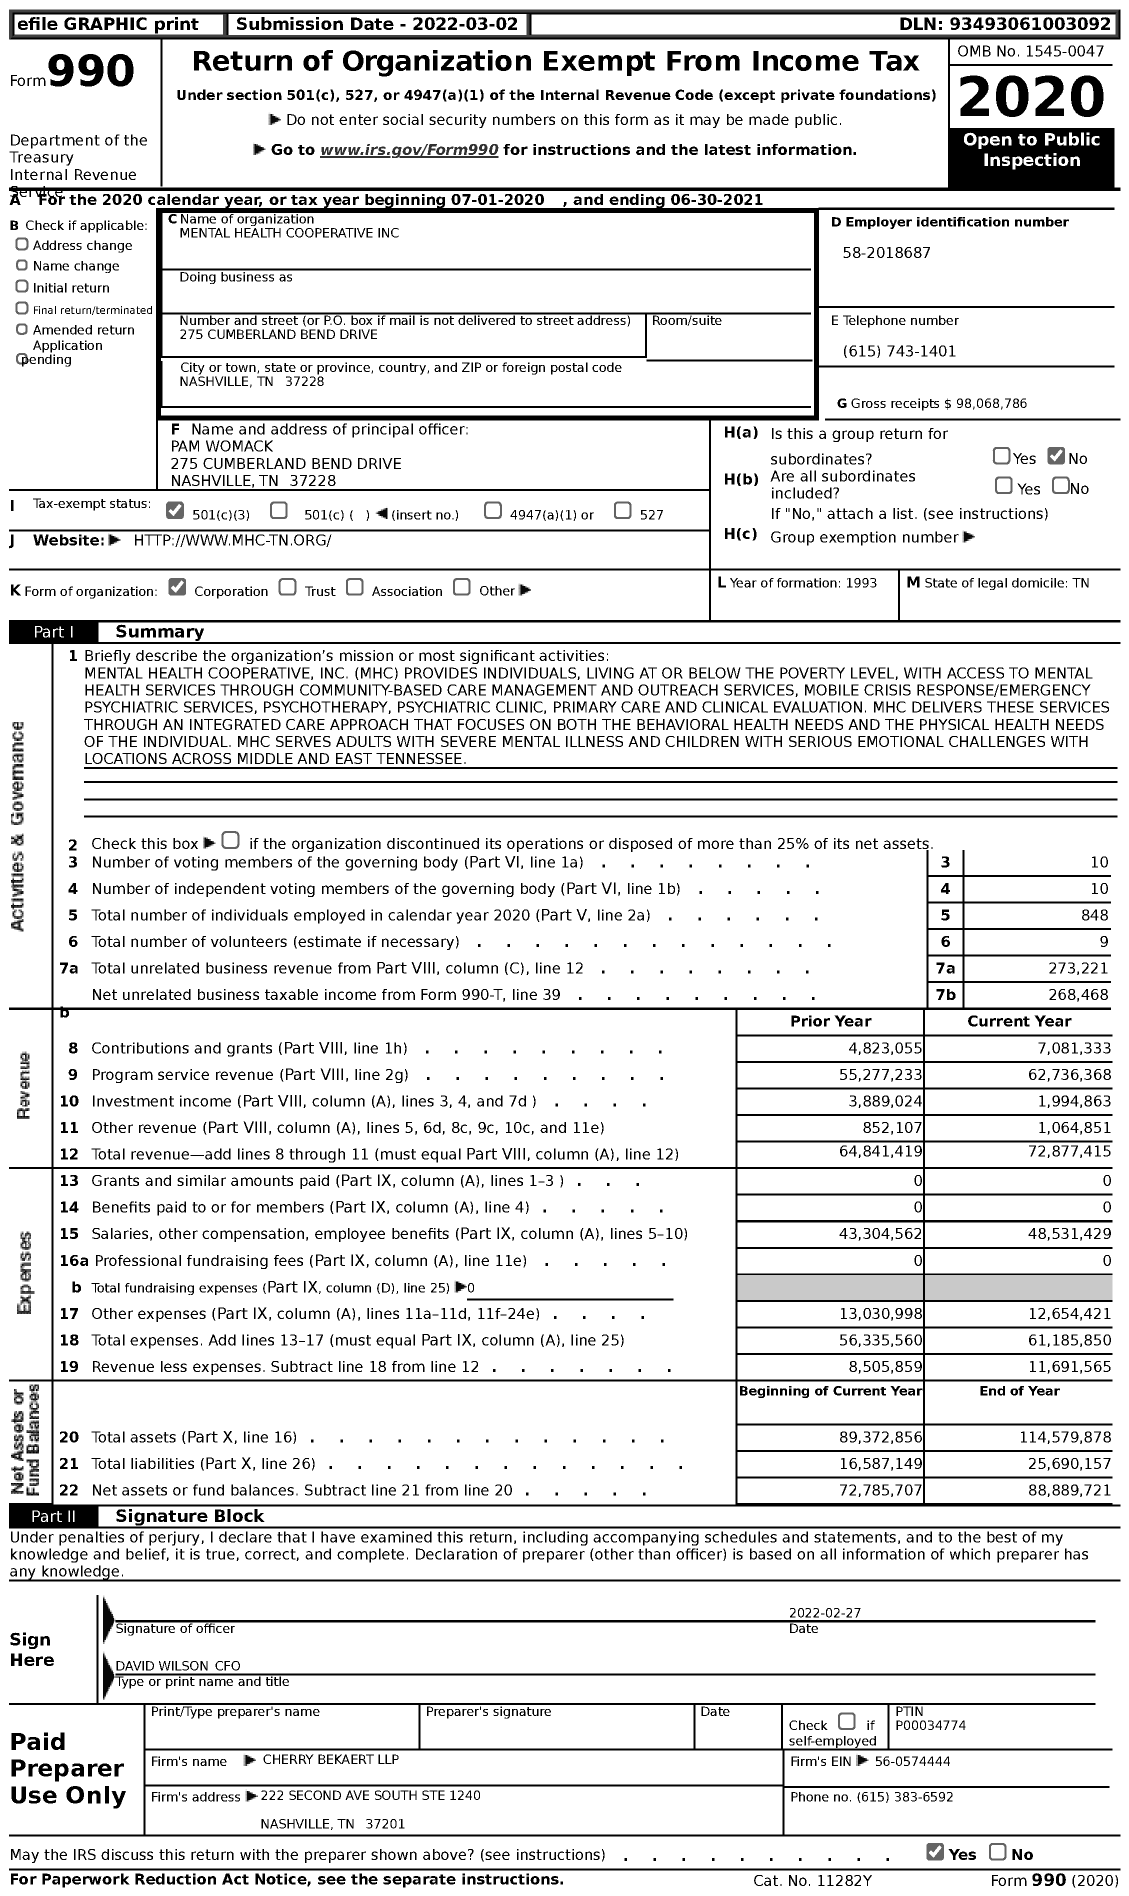 Image of first page of 2020 Form 990 for Mental Health Cooperative (MHC)